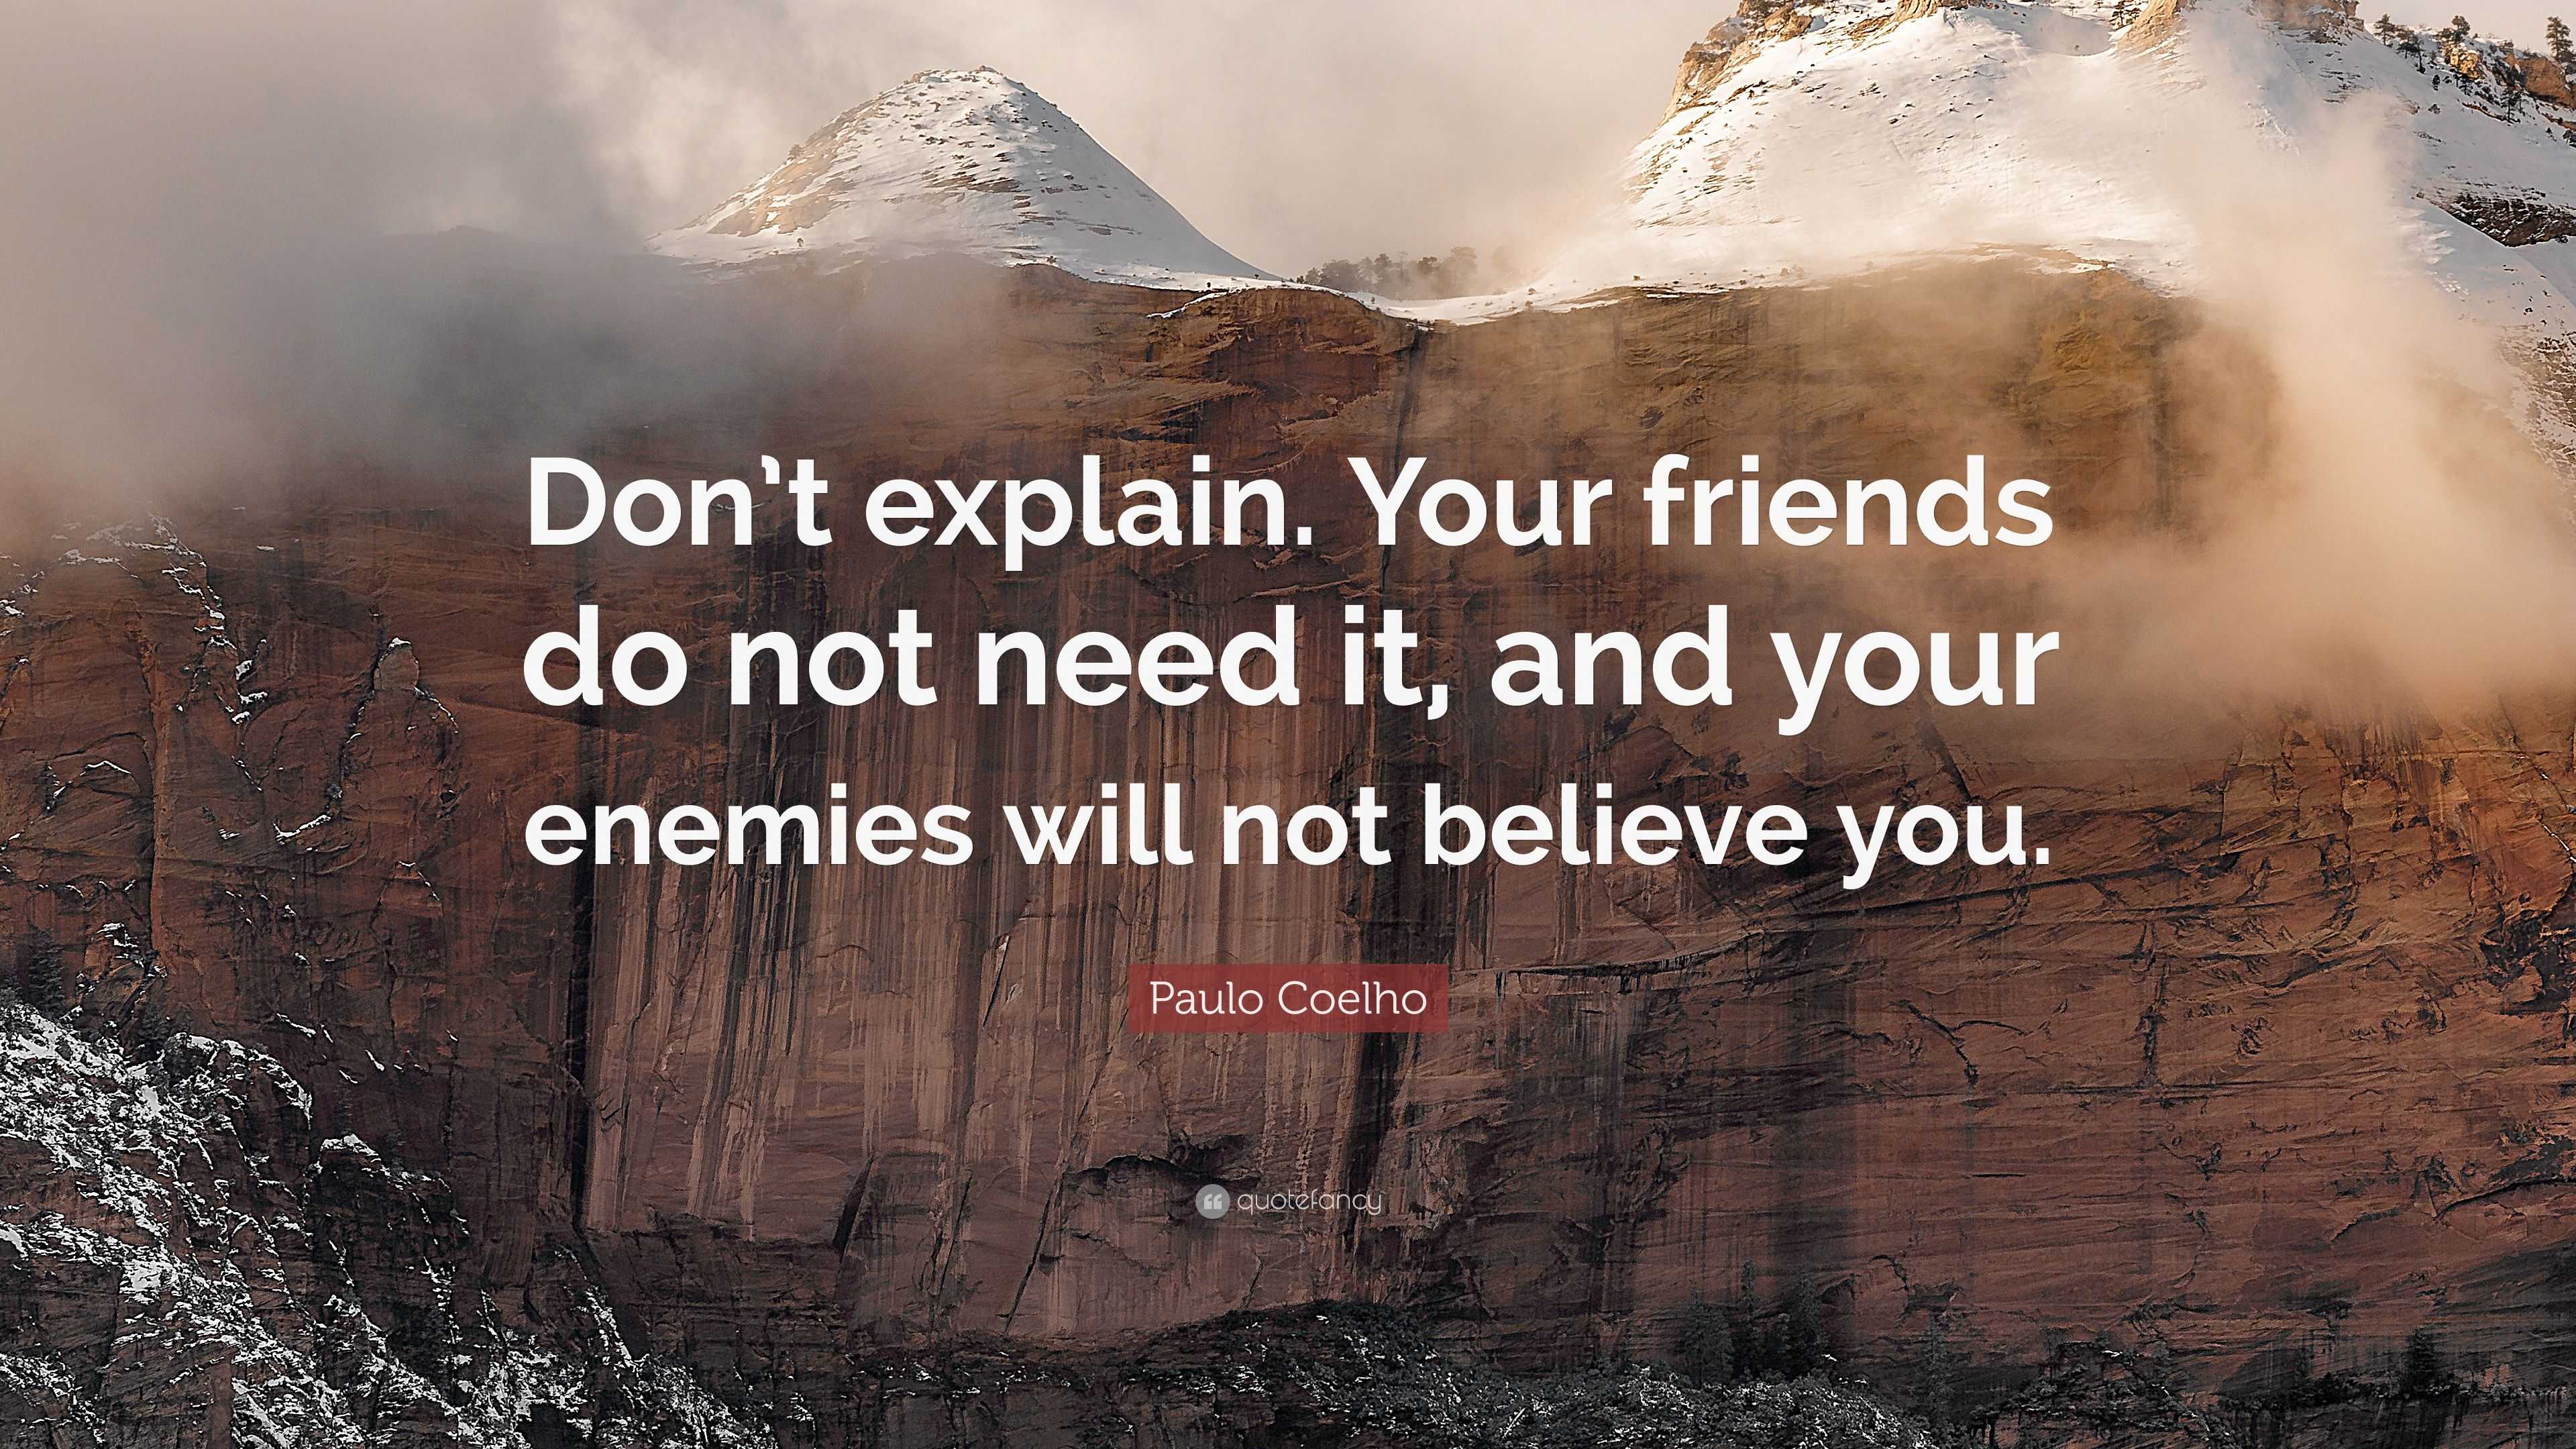 Paulo Coelho Quote: “Don’t explain. Your friends do not need it, and